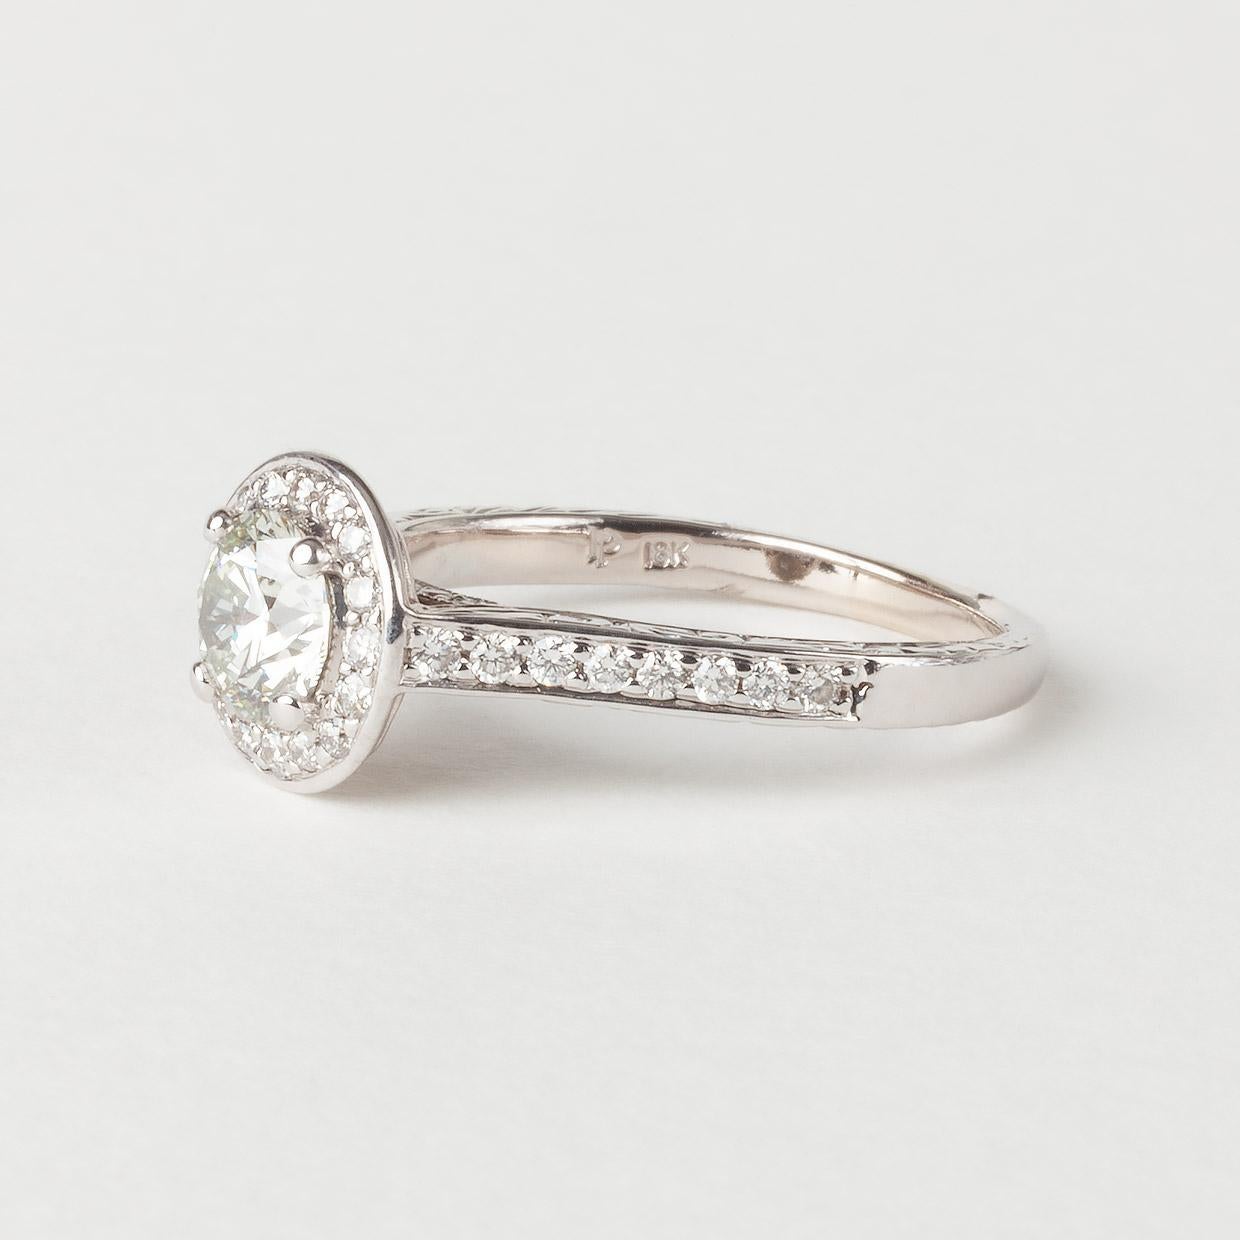 Product Details:
Estimated Retail:  $6,480.00
Brand: Penny Preville
Collection: Penelope
Main Stone: Diamond
Main Stone Shape: Round
Main Stone Weight: 0.73
Main Stone Color: I
Diamond Color: I
Main Stone Clarity: SI1
Clarity: SI1
Main Stone